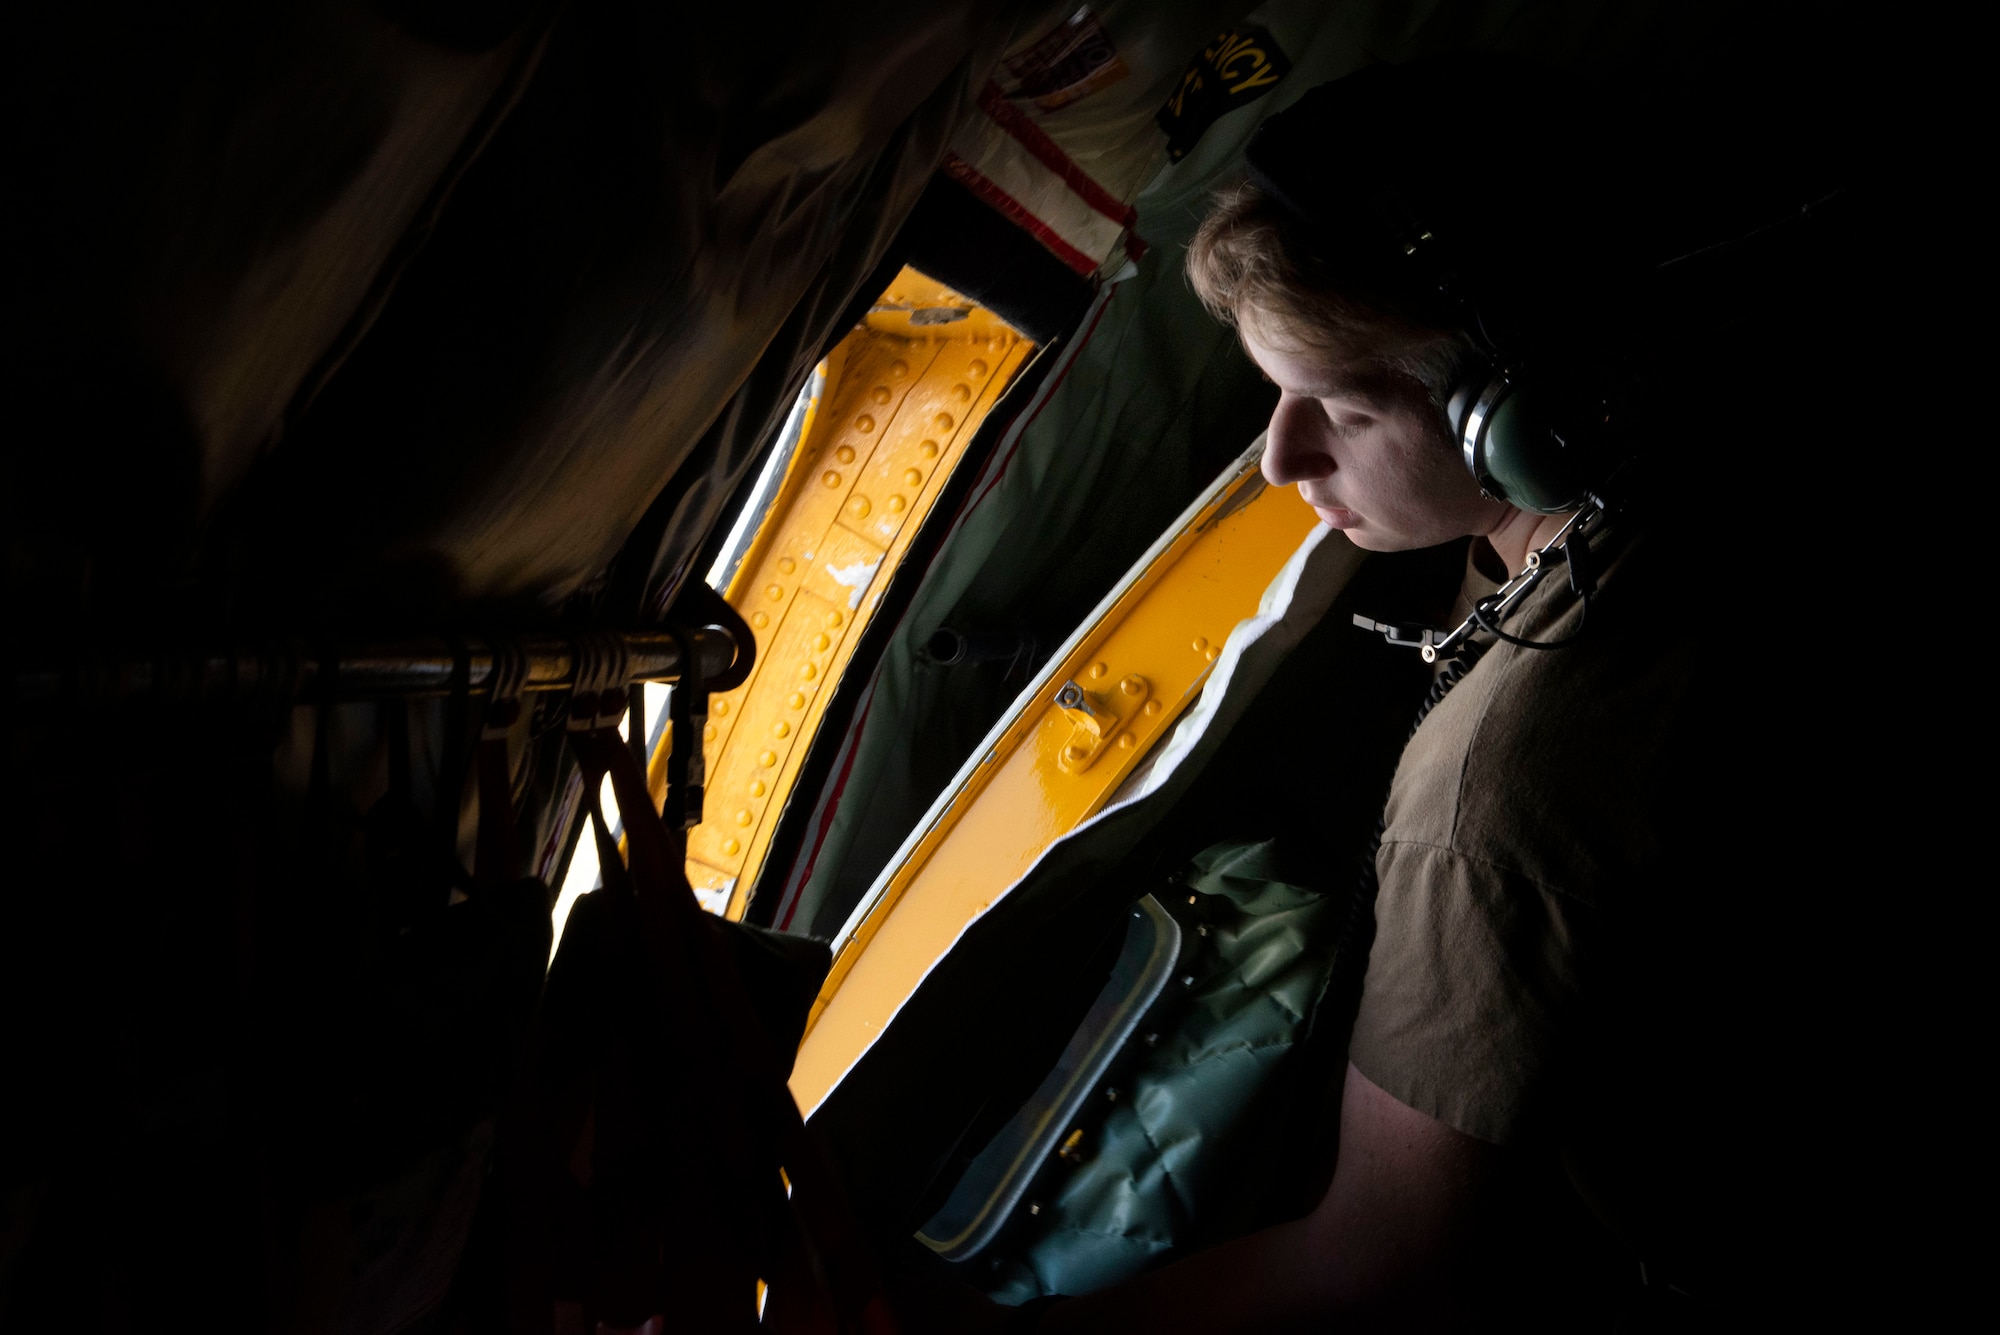 U.S. Air Force Airman 1st Class Austin Buller, 22nd Expeditionary Air Refueling Squadron boom operator, prepares his aircraft for takeoff at Incirlik Air Base, Turkey, May 29, 2020. We are working to incorporate appropriate rotational forces and prepositioned equipment that complement NATO rotations in order to deter threats from potential adversaries. (U.S. Air Force photo by Staff Sgt. Joshua Magbanua)